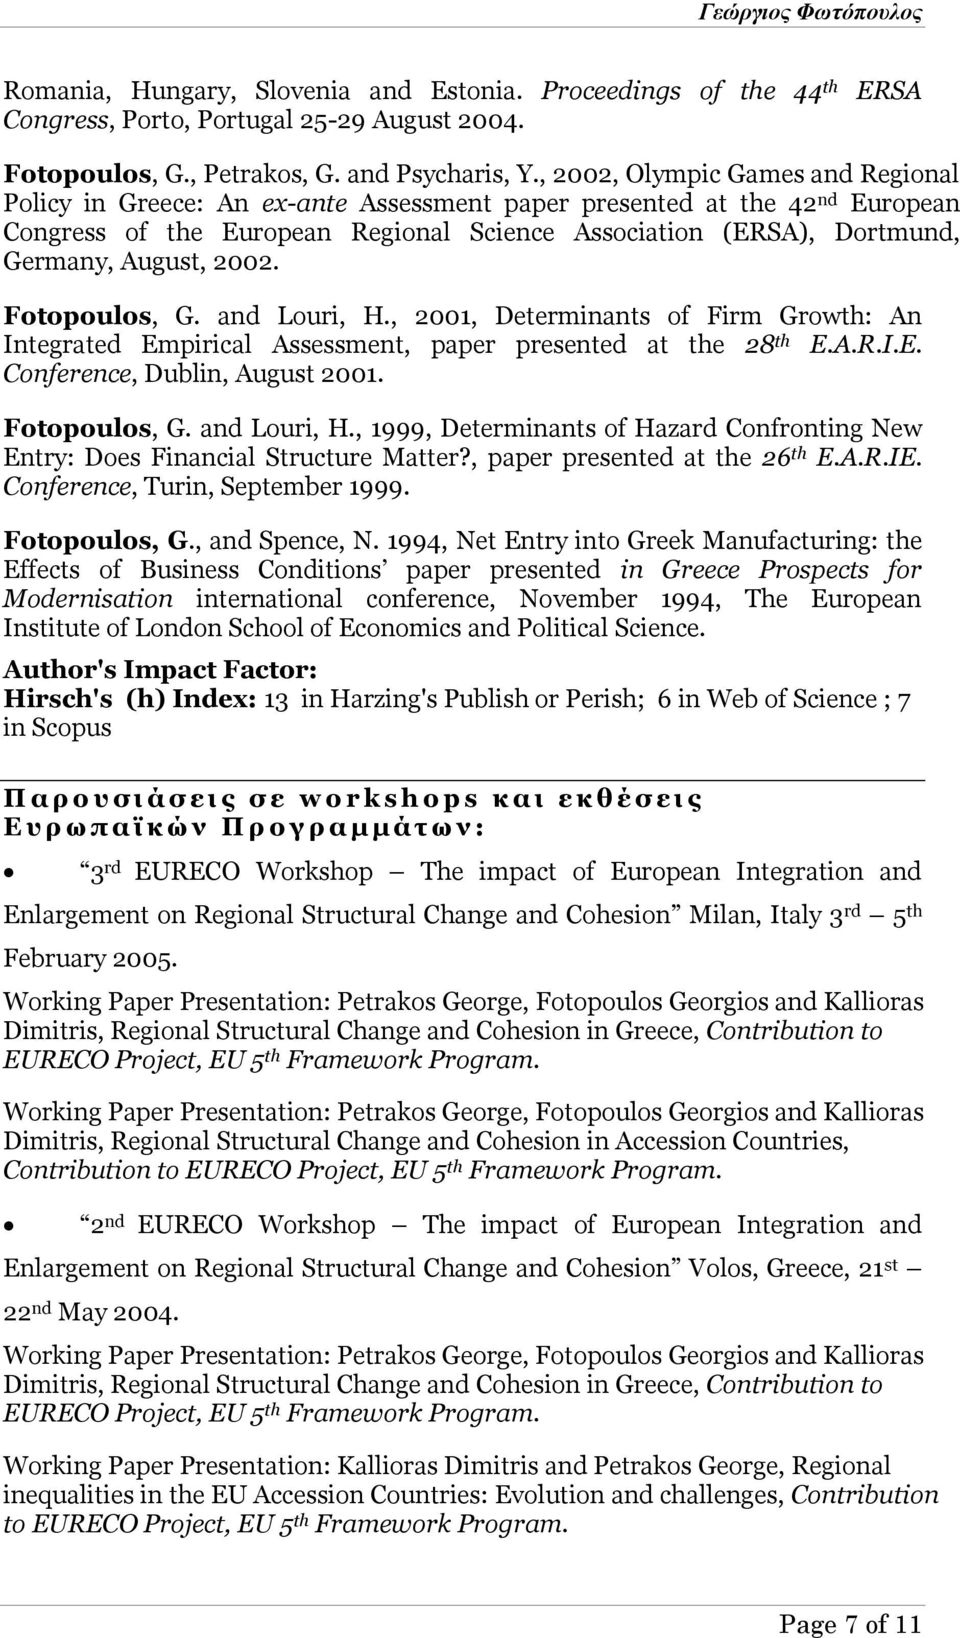 August, 2002. Fotopoulos, G. and Louri, H., 2001, Determinants of Firm Growth: An Integrated Empirical Assessment, paper presented at the 28 th E.A.R.I.E. Conference, Dublin, August 2001.